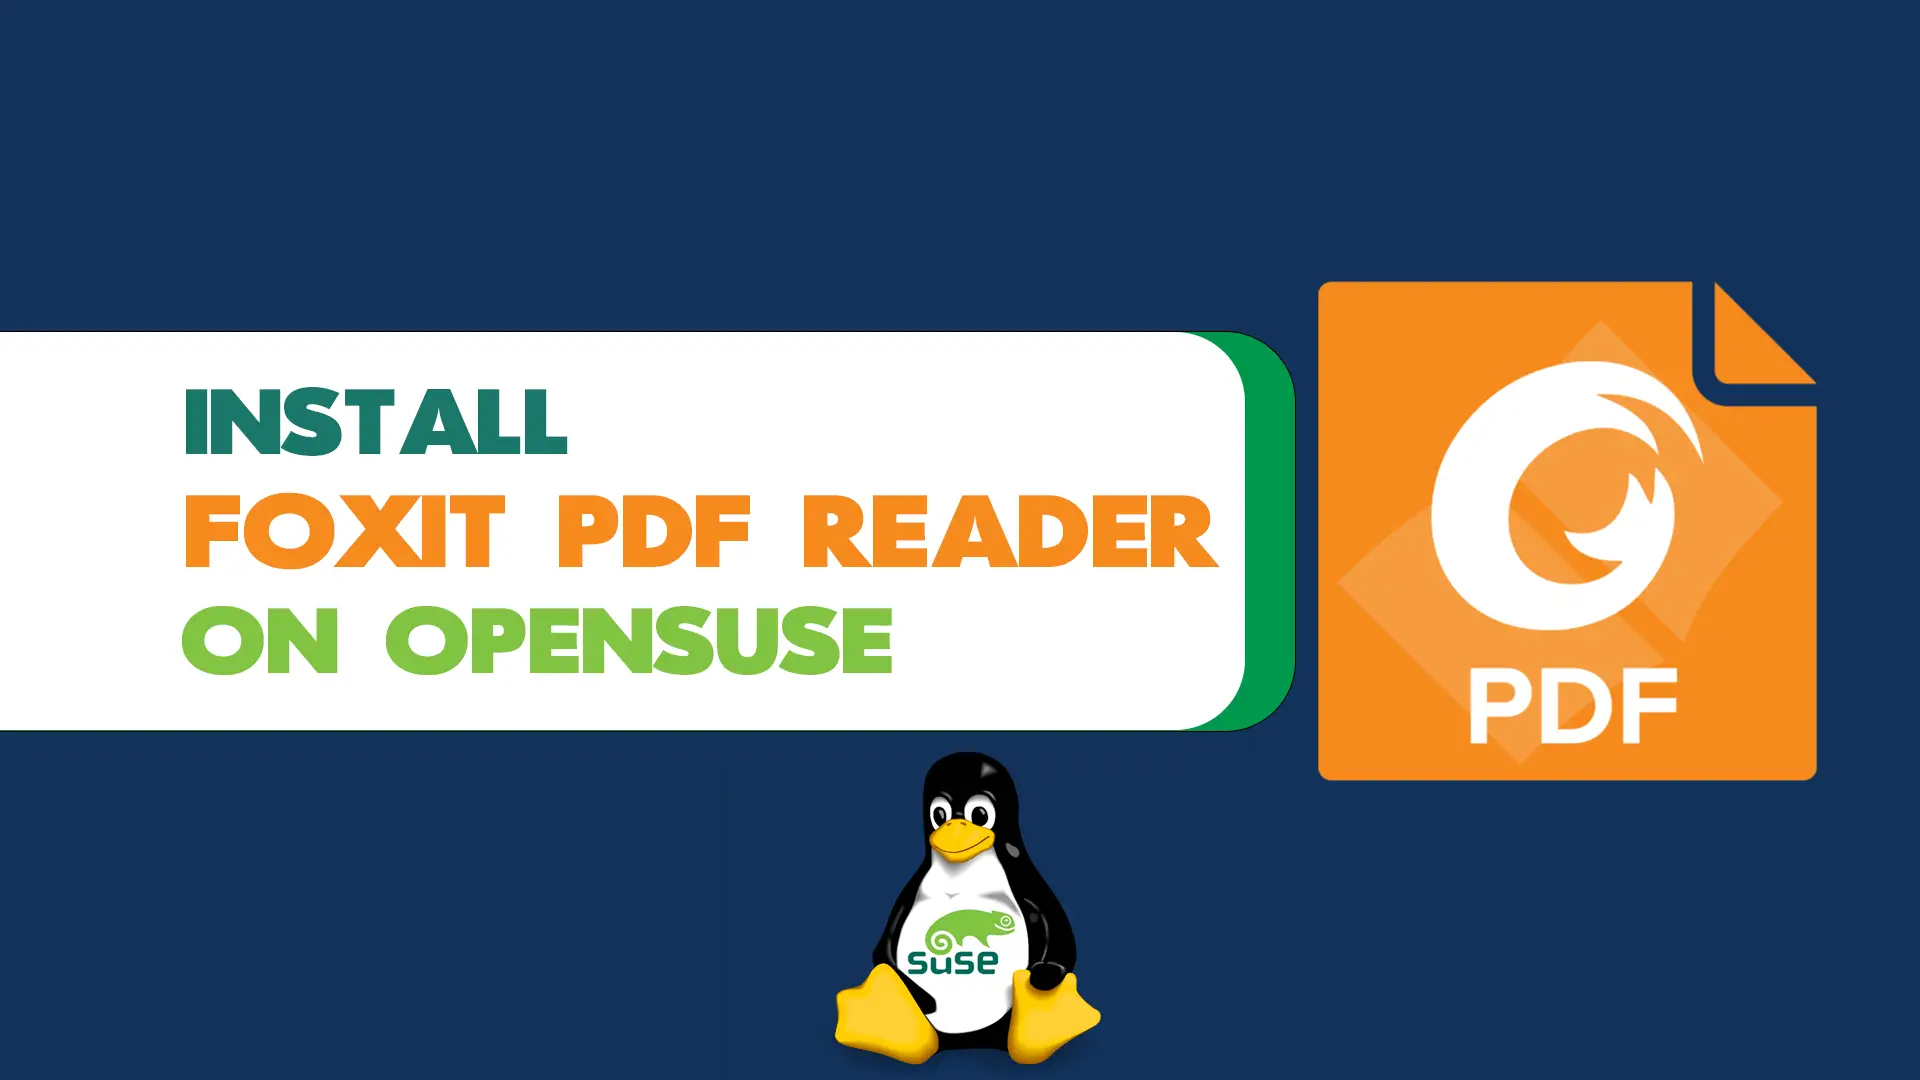 Install Foxit PDF Reader on OpenSUSE